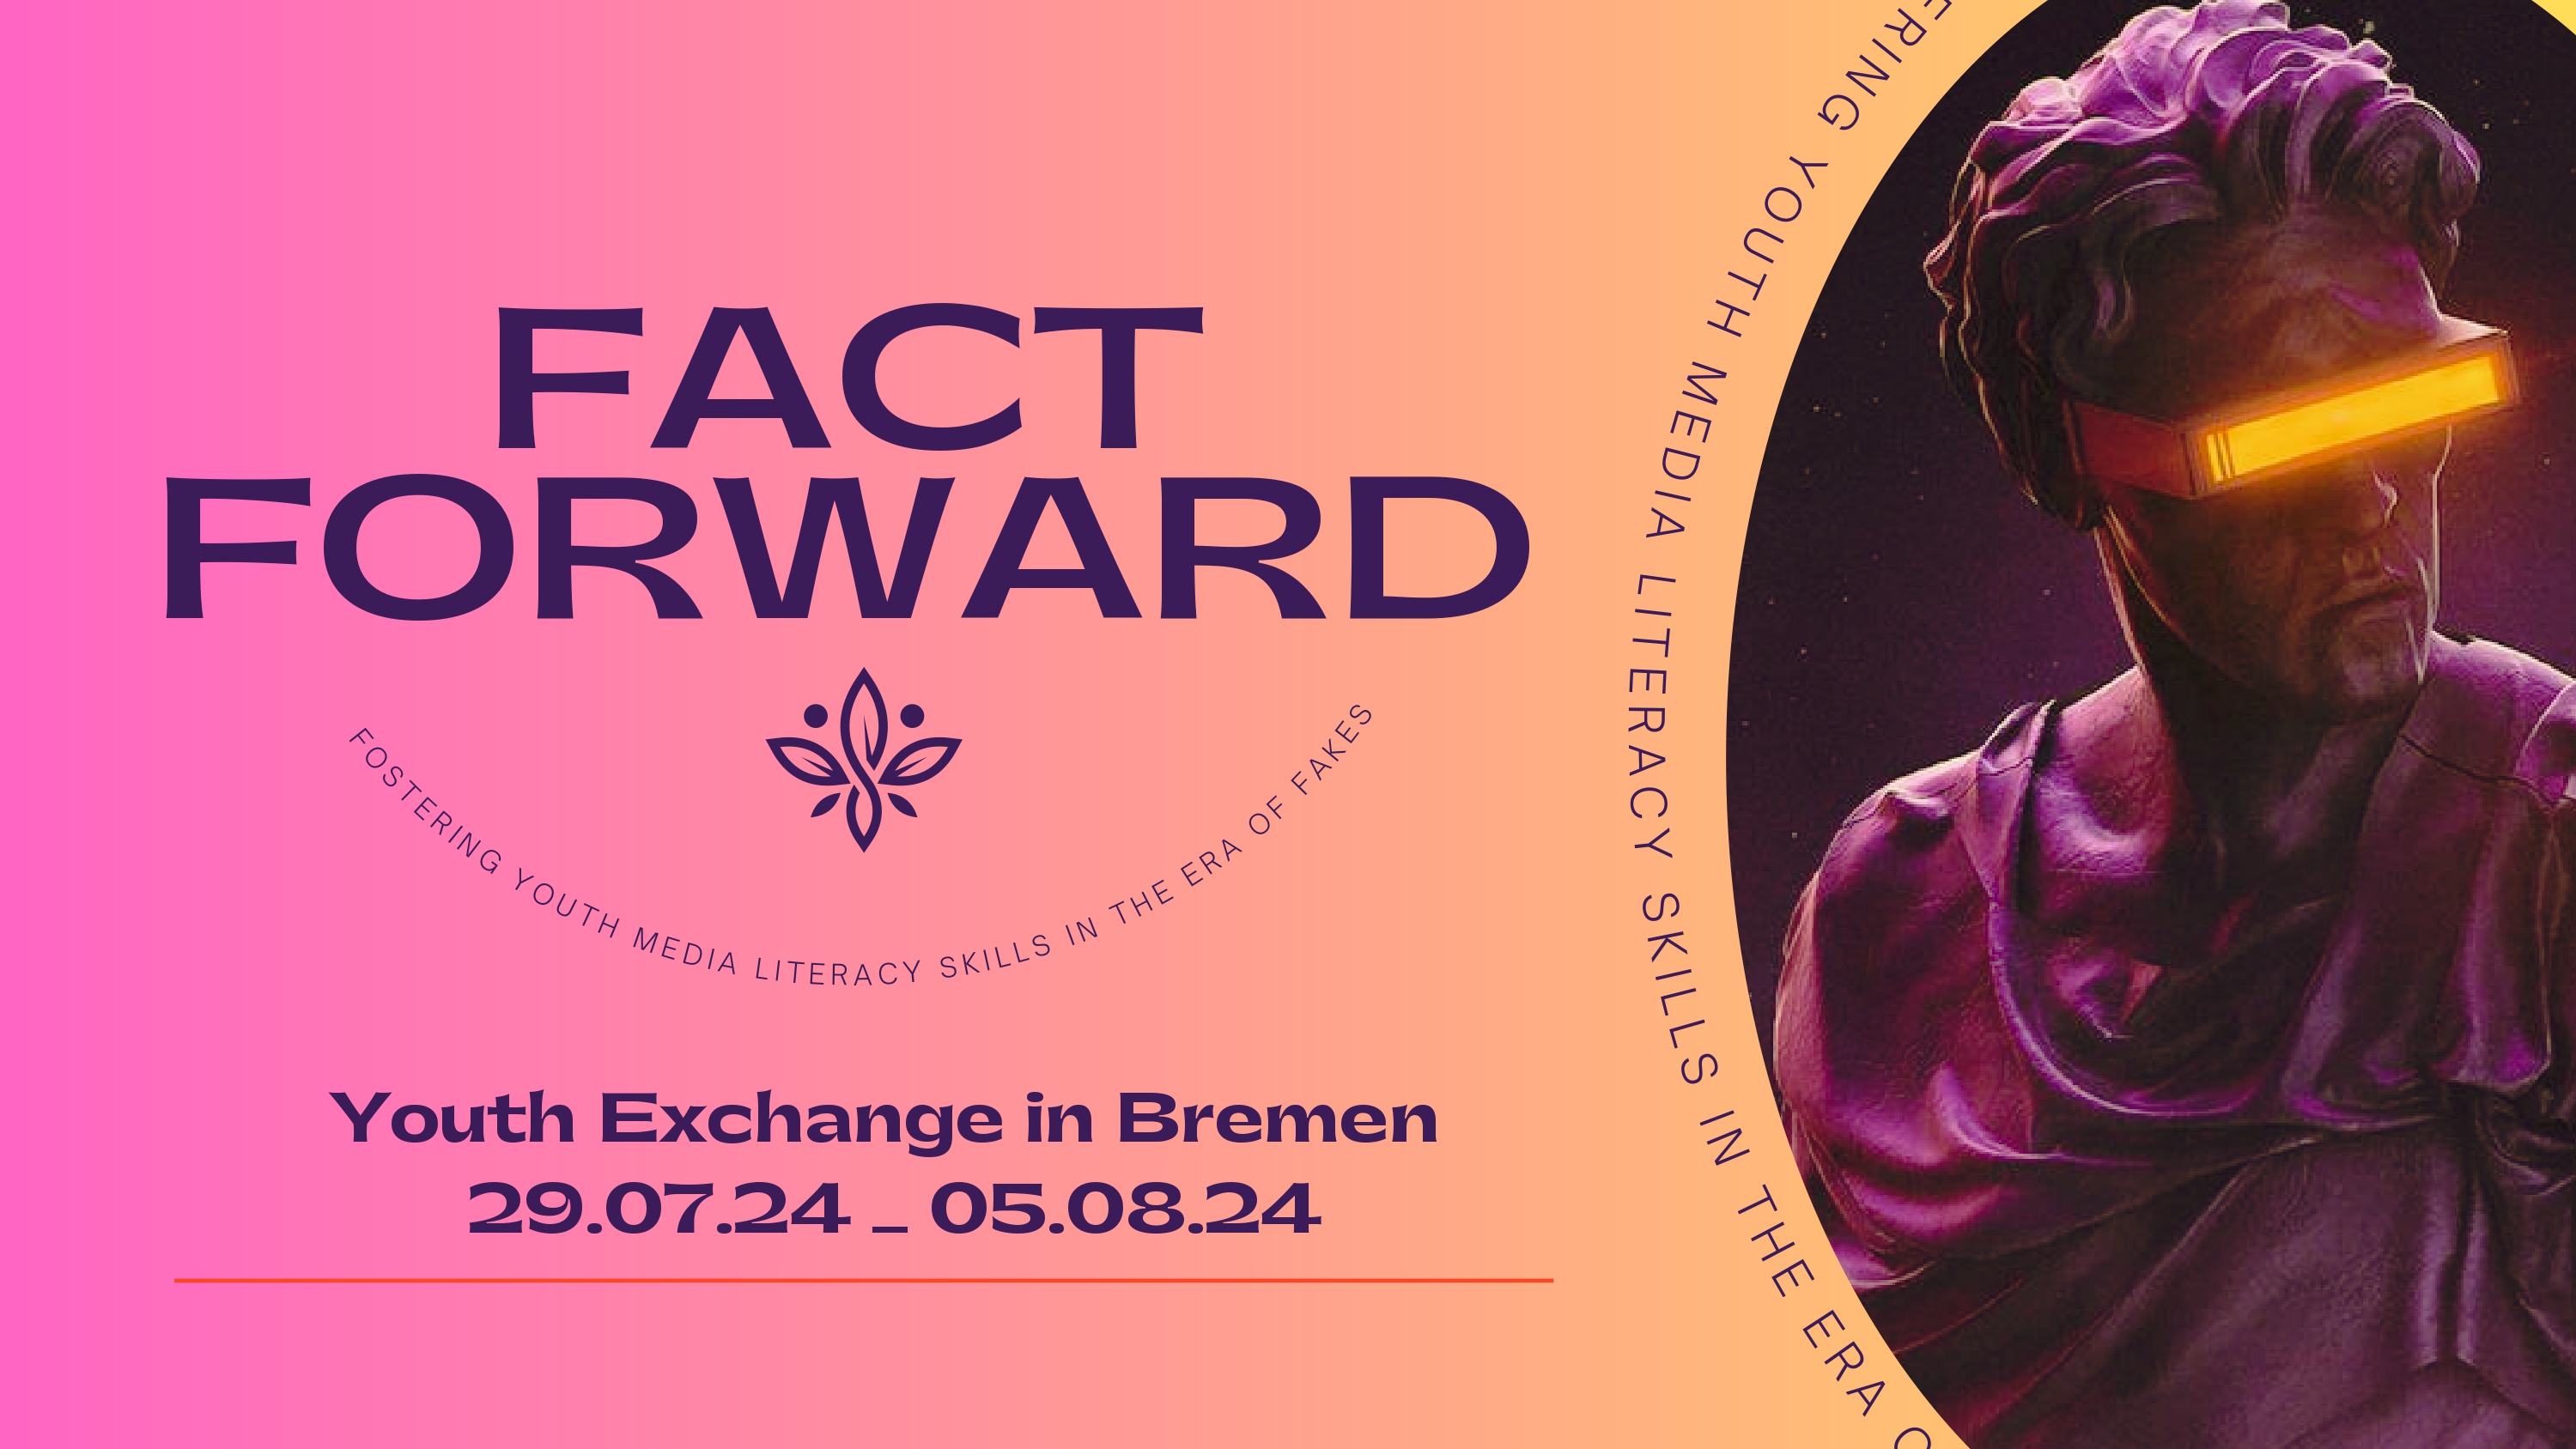 Youth Exchange: Fact Forward